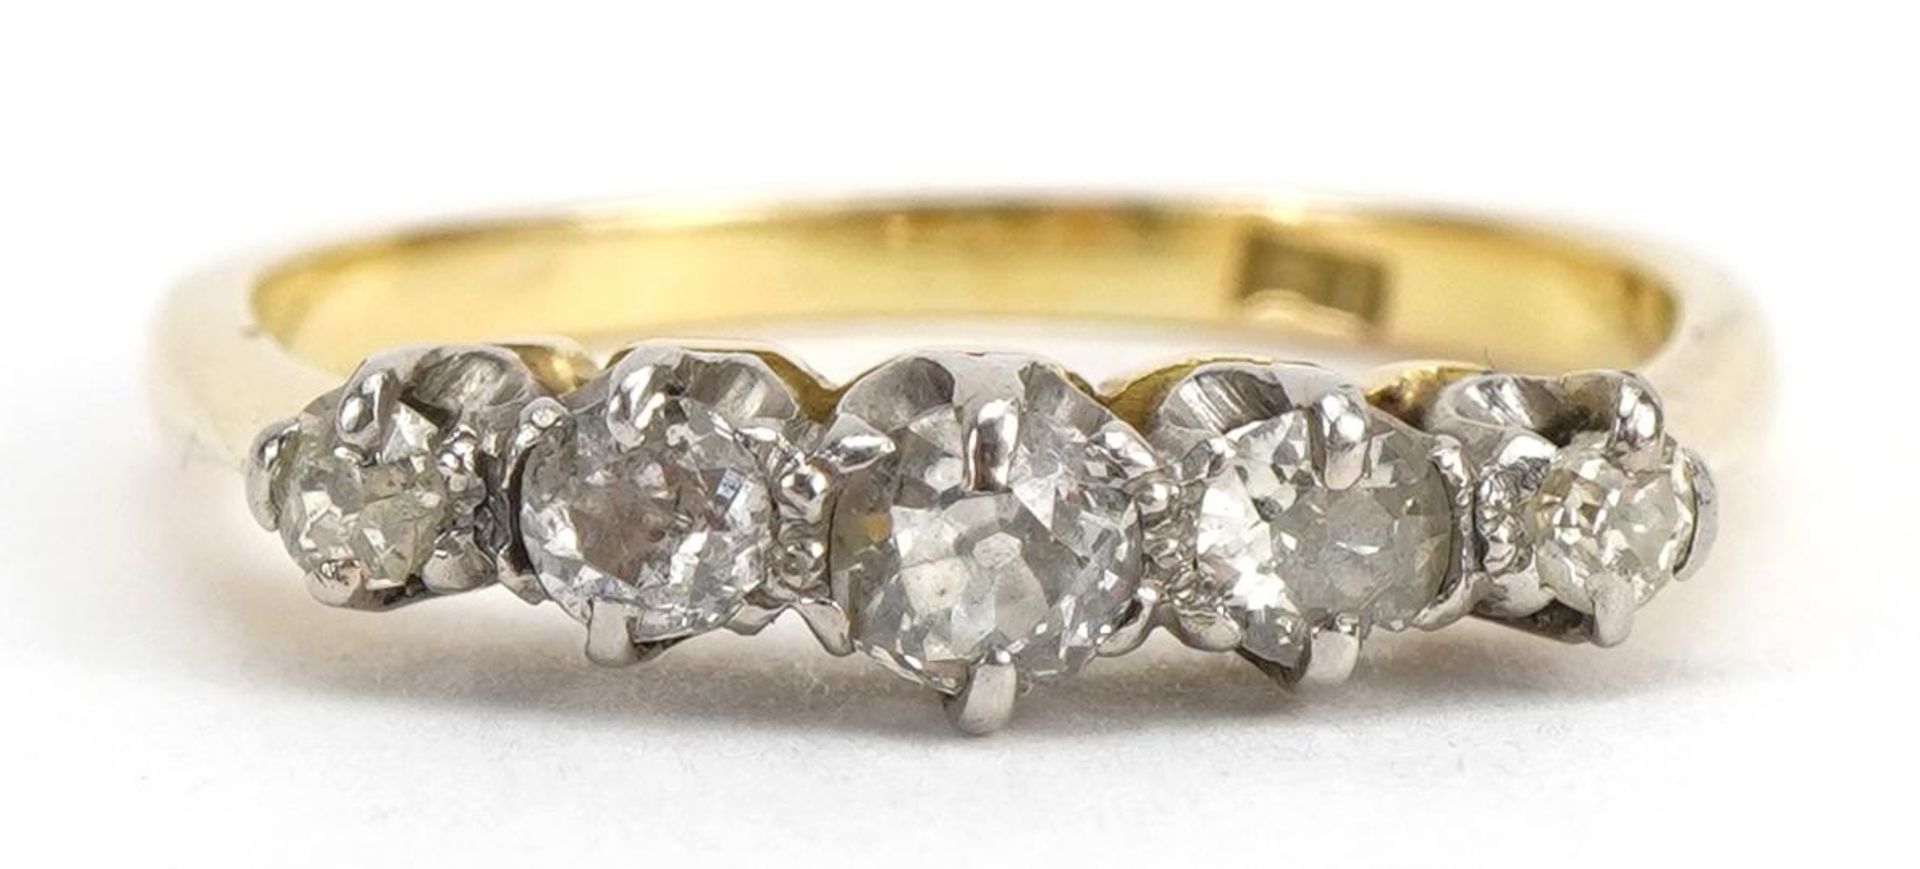 18ct gold diamond five stone ring, the largest diamond approximately 3.1mm in diameter, size M/N,